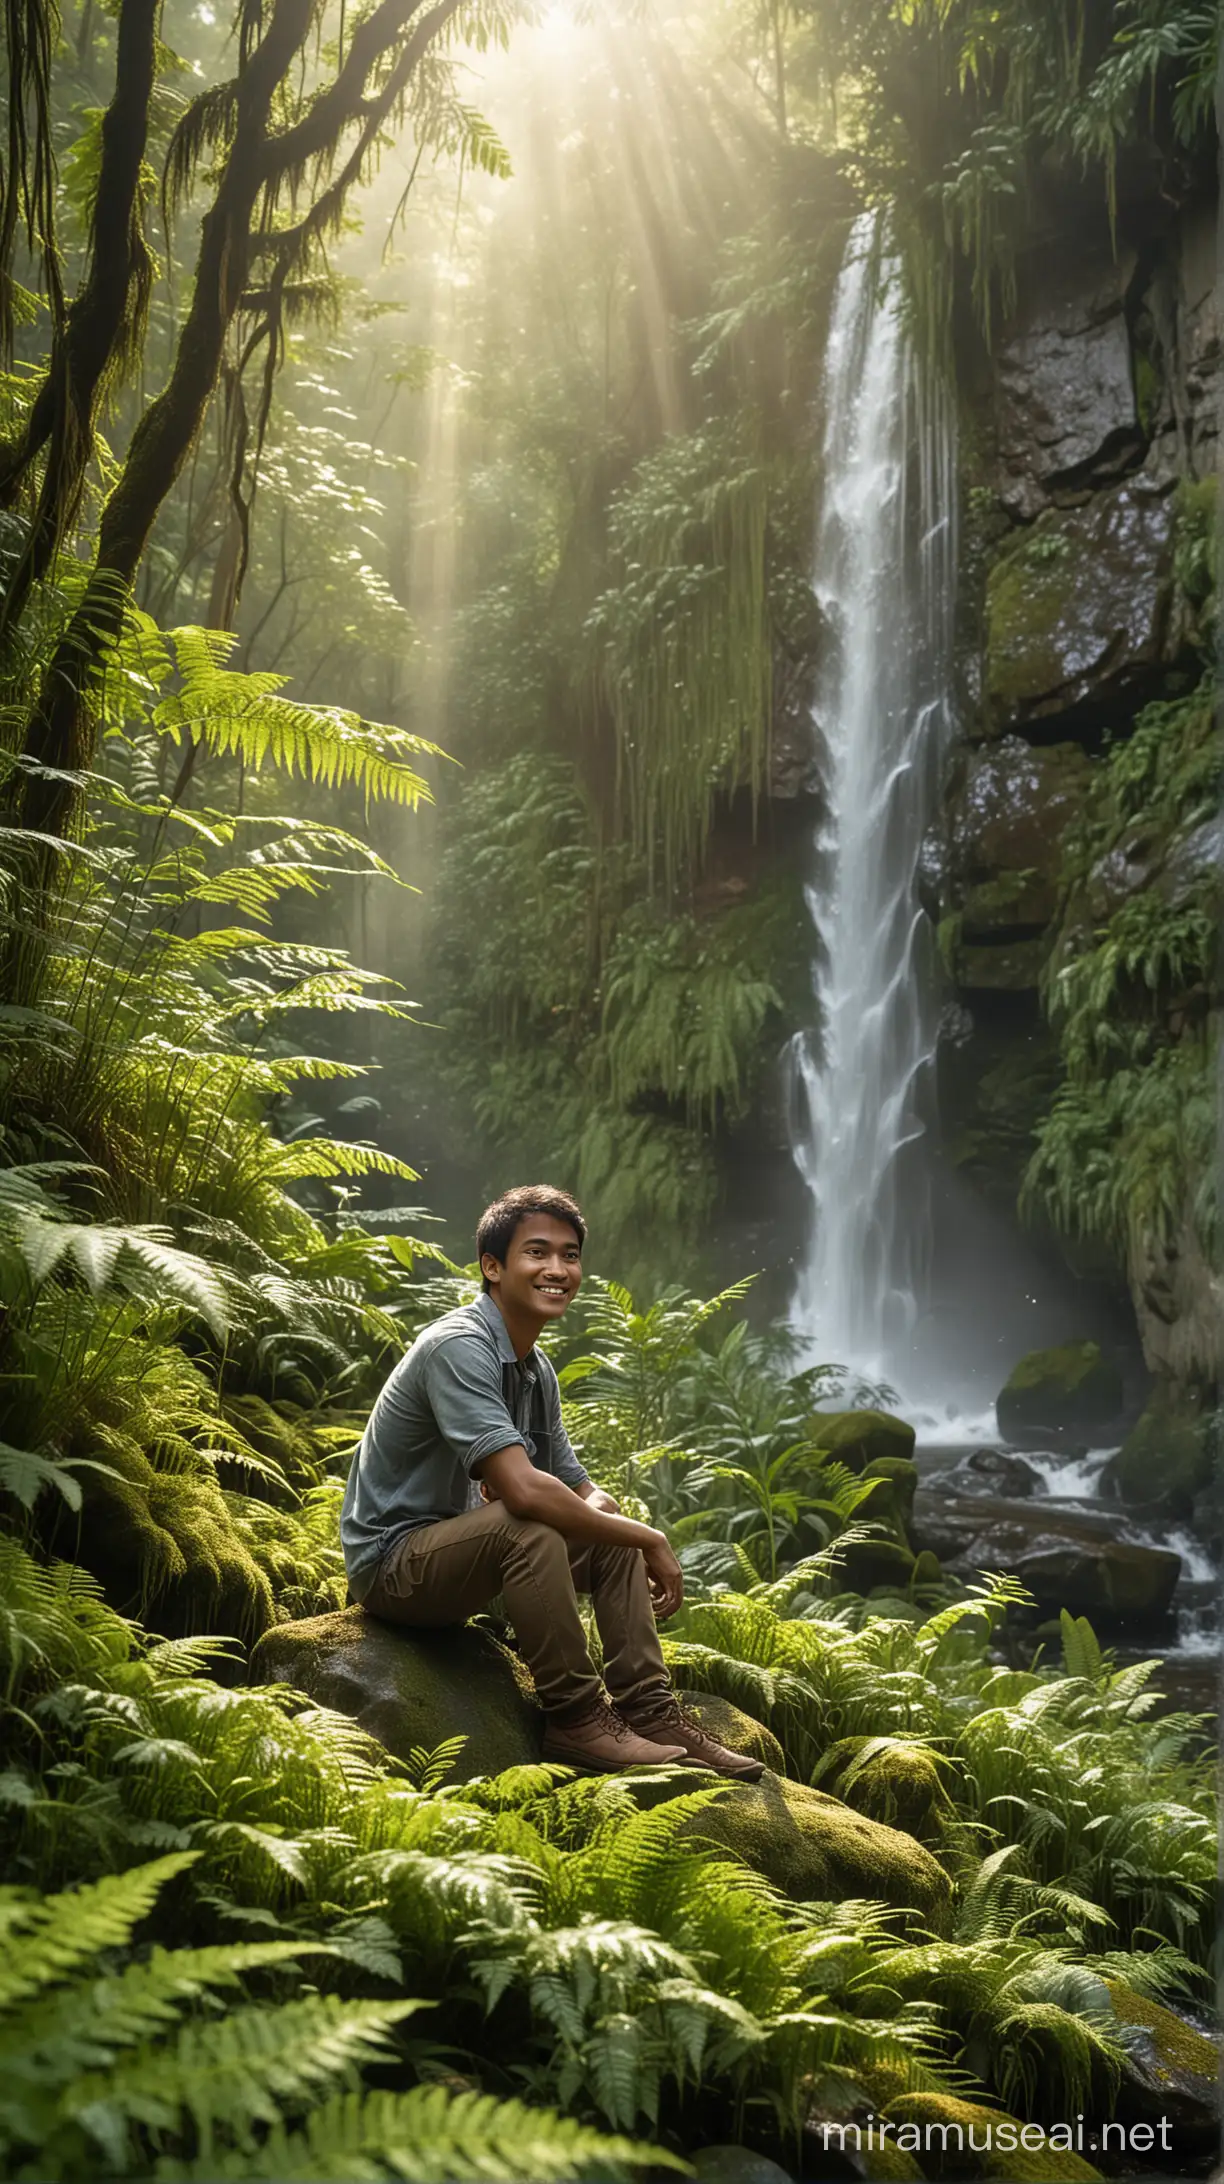 Smiling Indonesian Man in Sunlit Forest with Waterfall